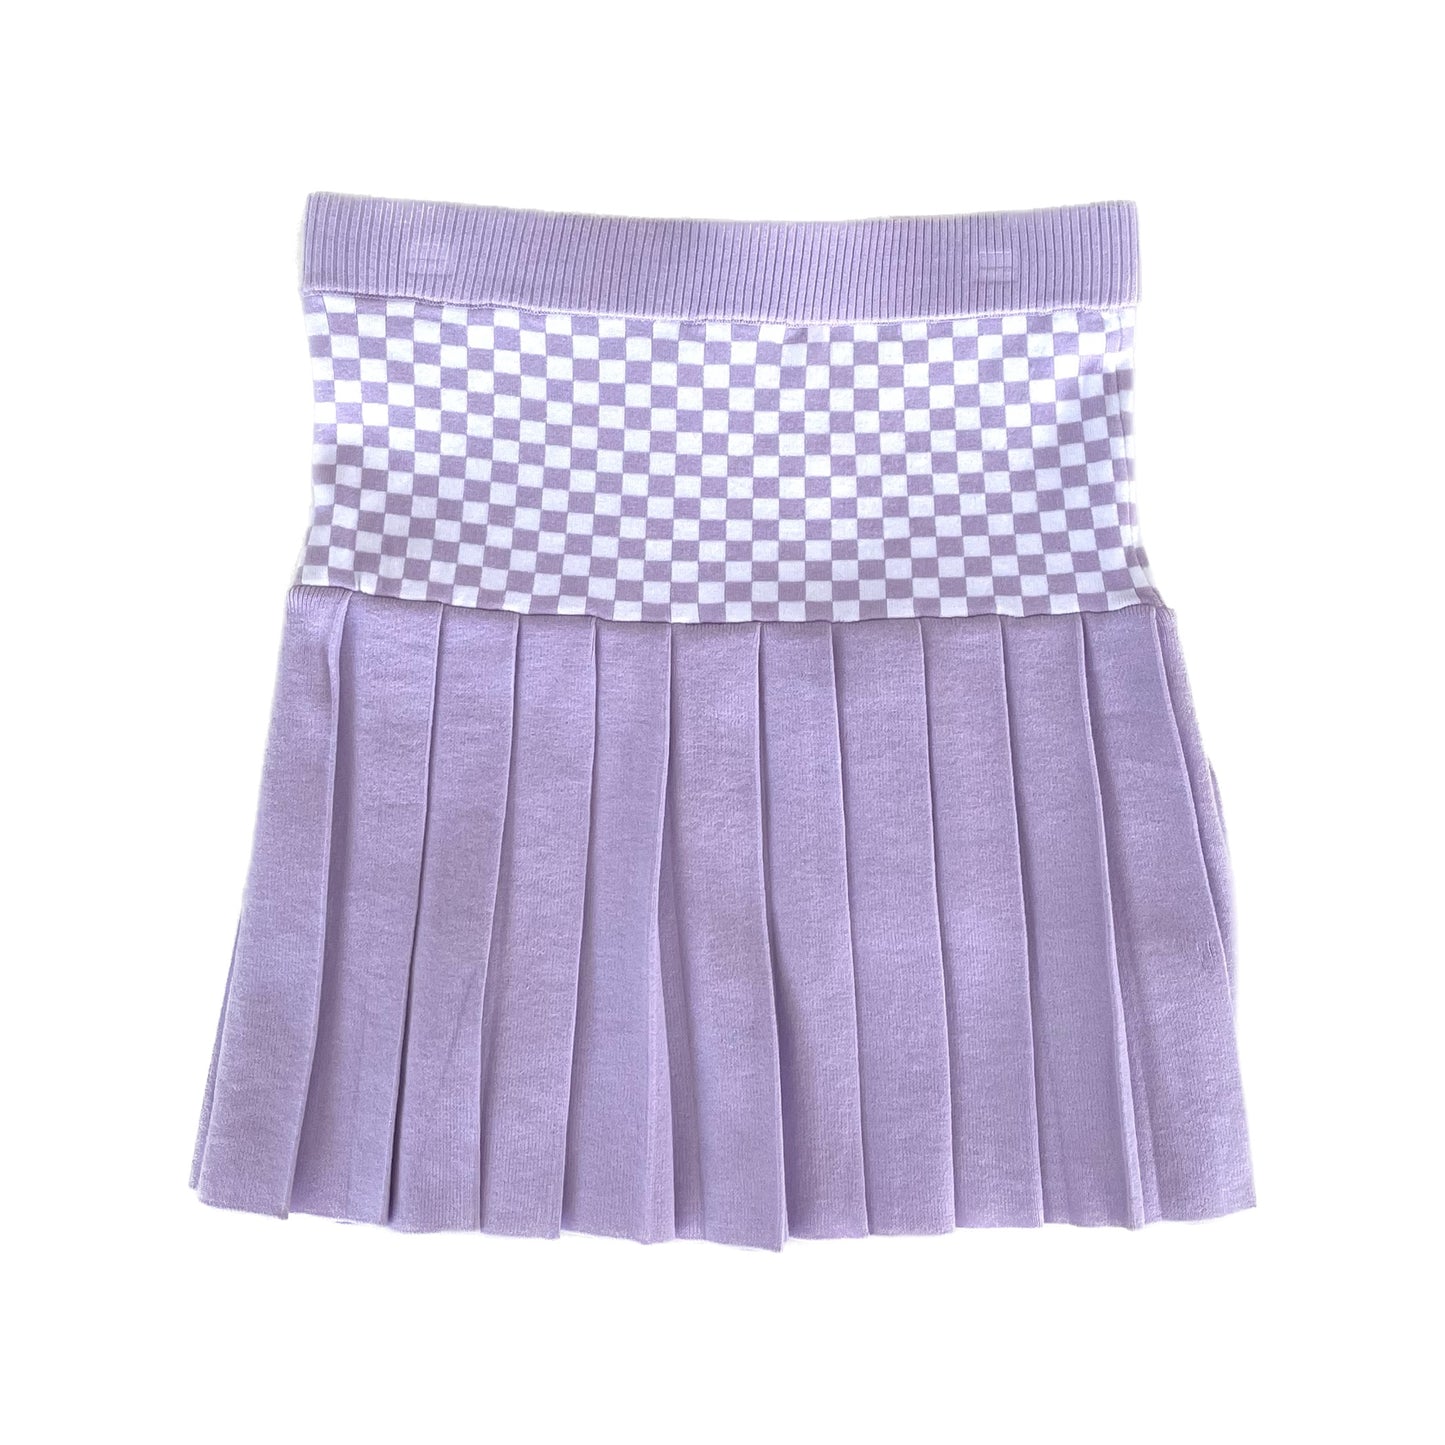 Checked Pleated Skirt / light pink and white / チェックプリーツニットスカート